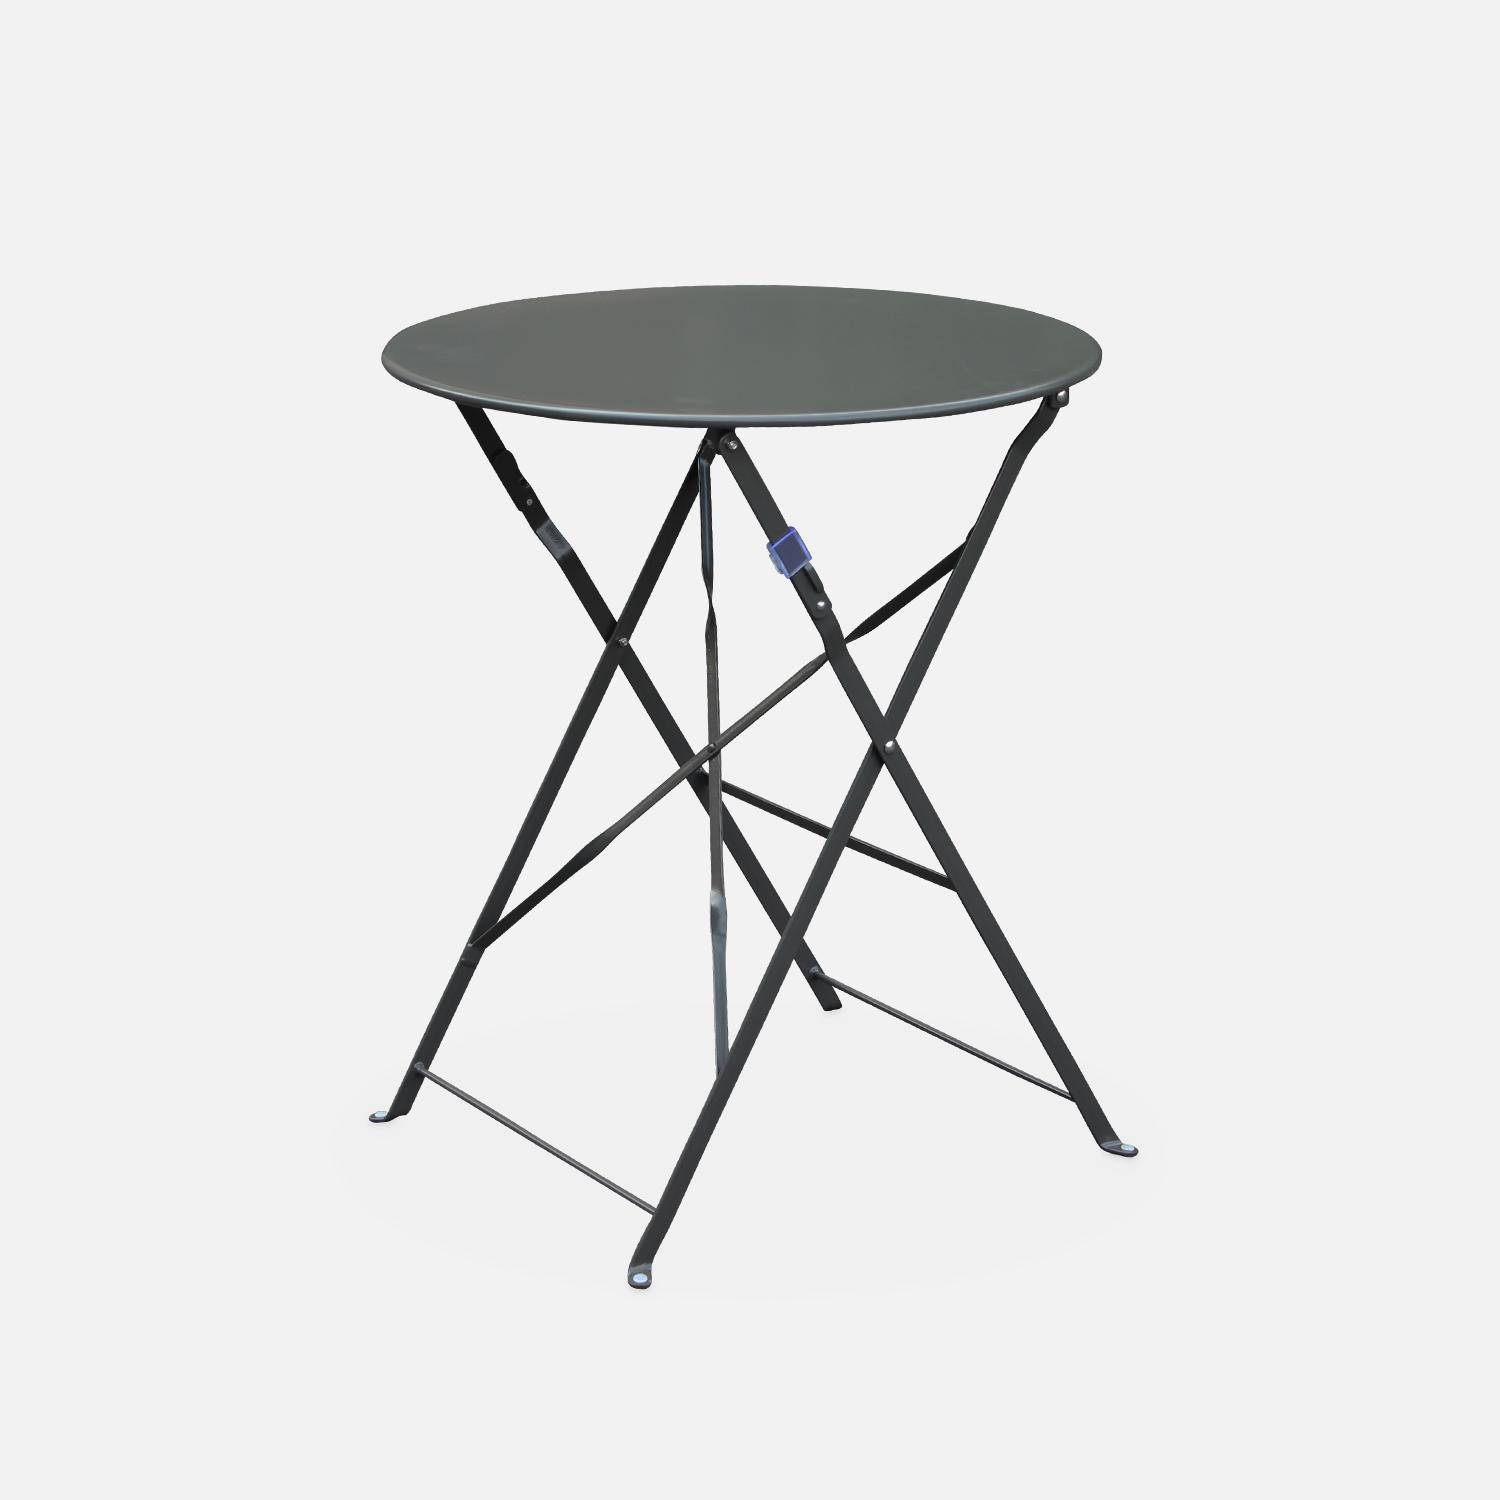 Foldable bistro garden table - Round Emilia anthracite- Round table Ø60cm, thermo-lacquered steel,sweeek,Photo4